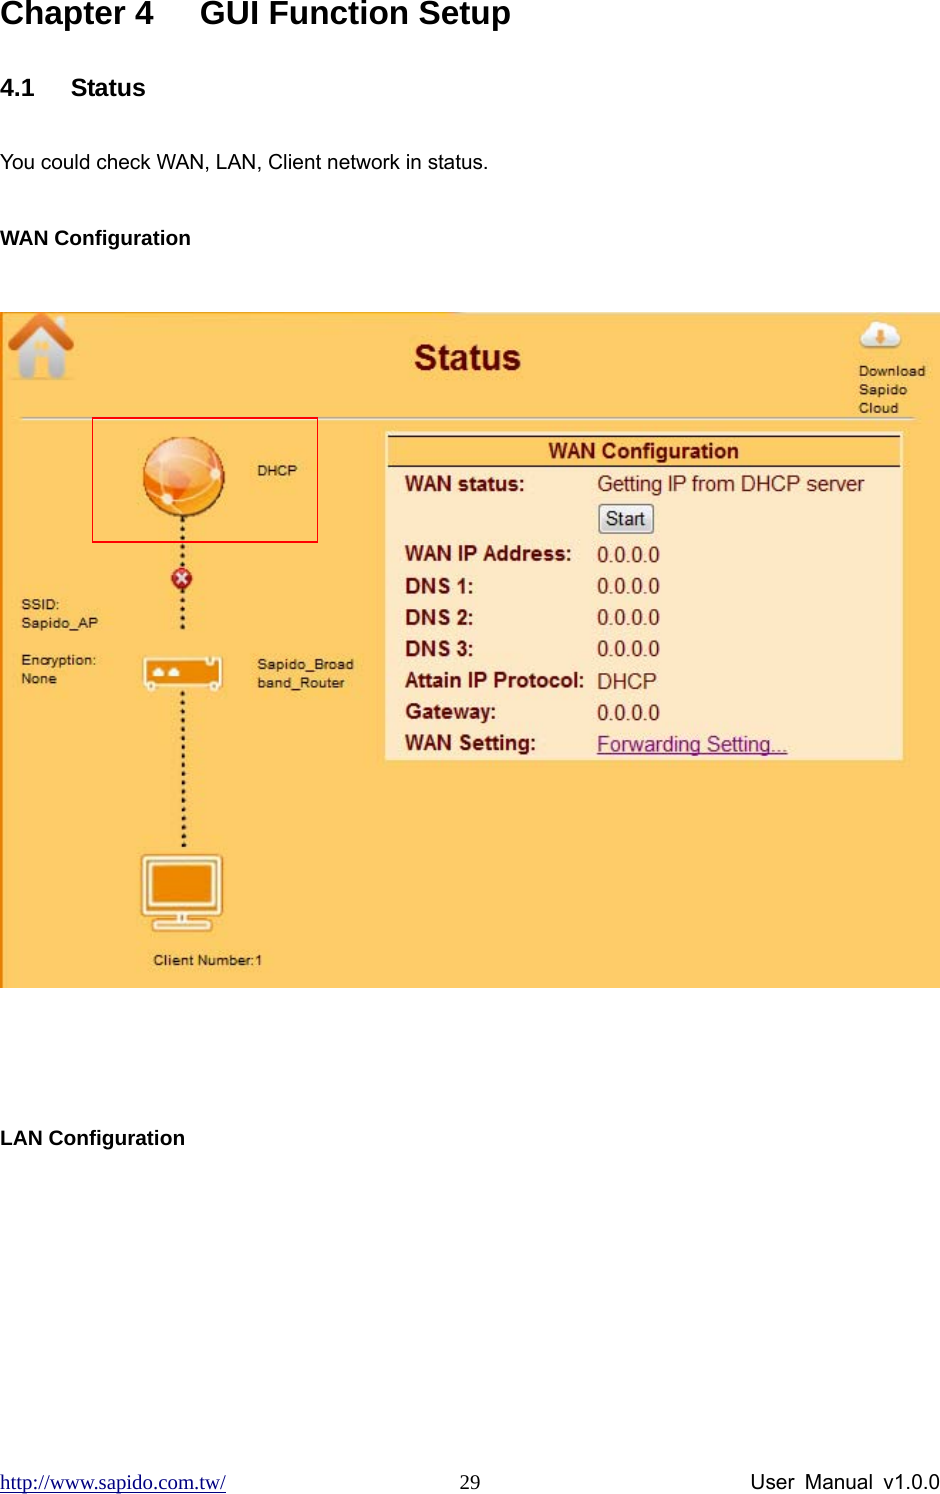 http://www.sapido.com.tw/                User Manual v1.0.0 29Chapter 4  GUI Function Setup 4.1 Status You could check WAN, LAN, Client network in status. WAN Configuration   LAN Configuration  